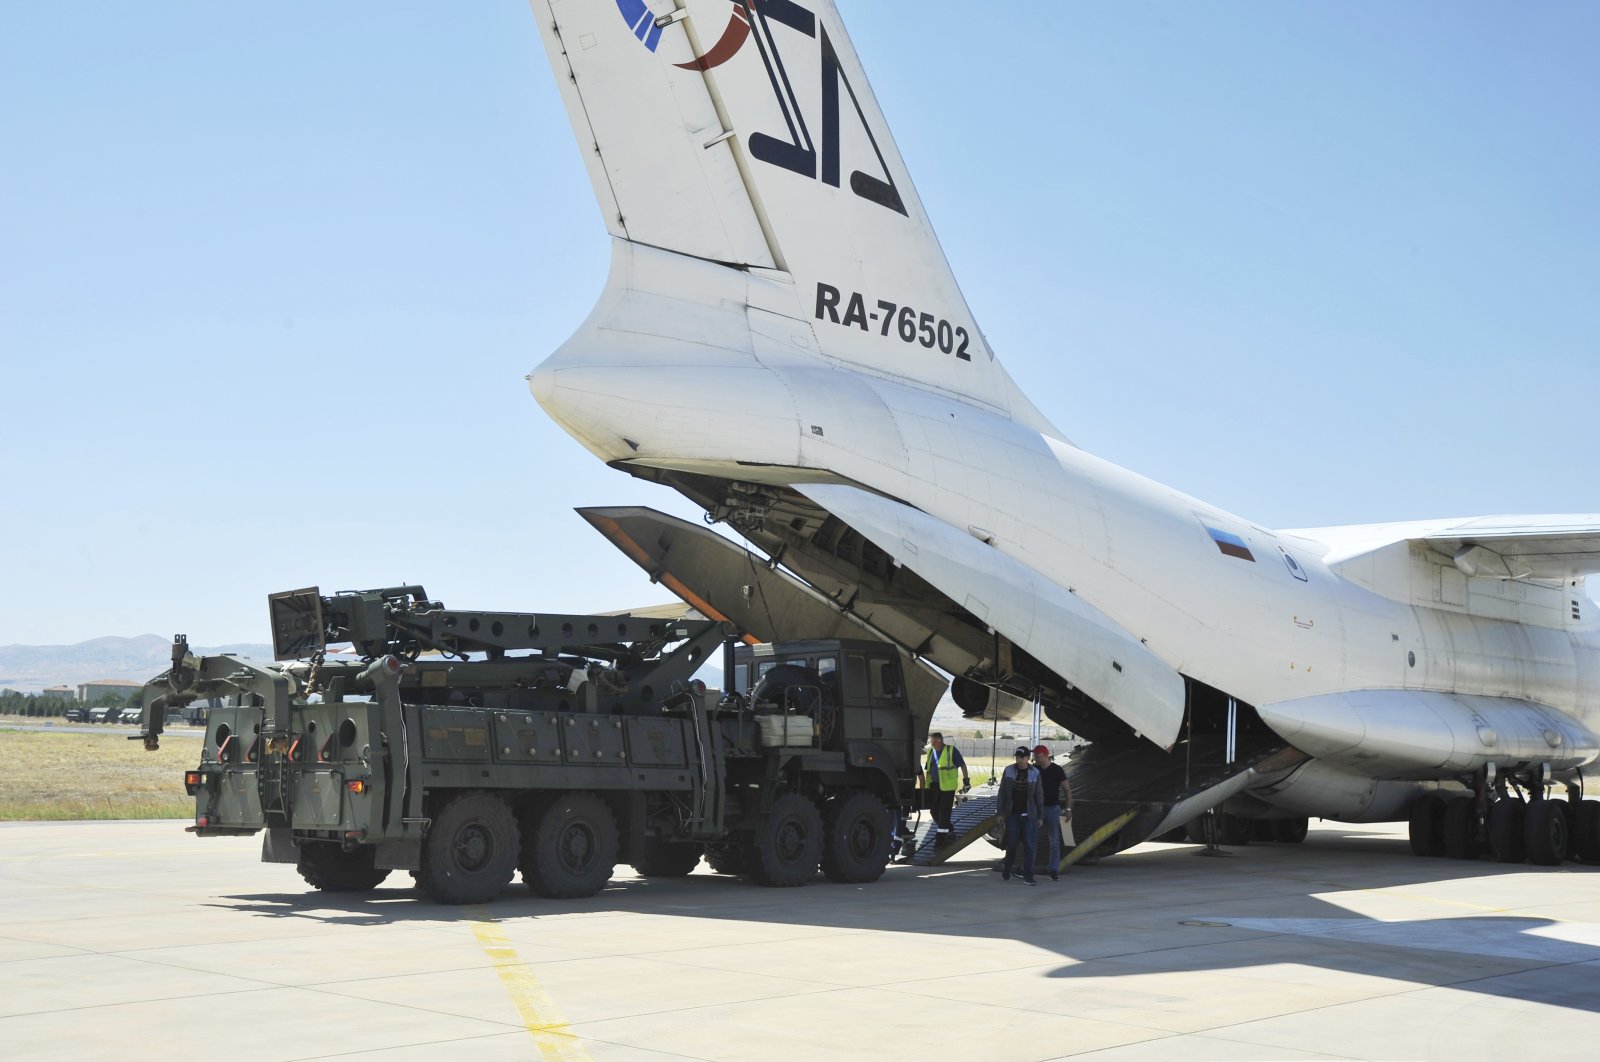 Military officials work around a Russian transport aircraft, carrying parts of the S-400 air defense systems, after it landed at Murted military airport outside Ankara, Turkey, Aug. 27, 2019. (Turkish Defense Ministry via AP, Pool)